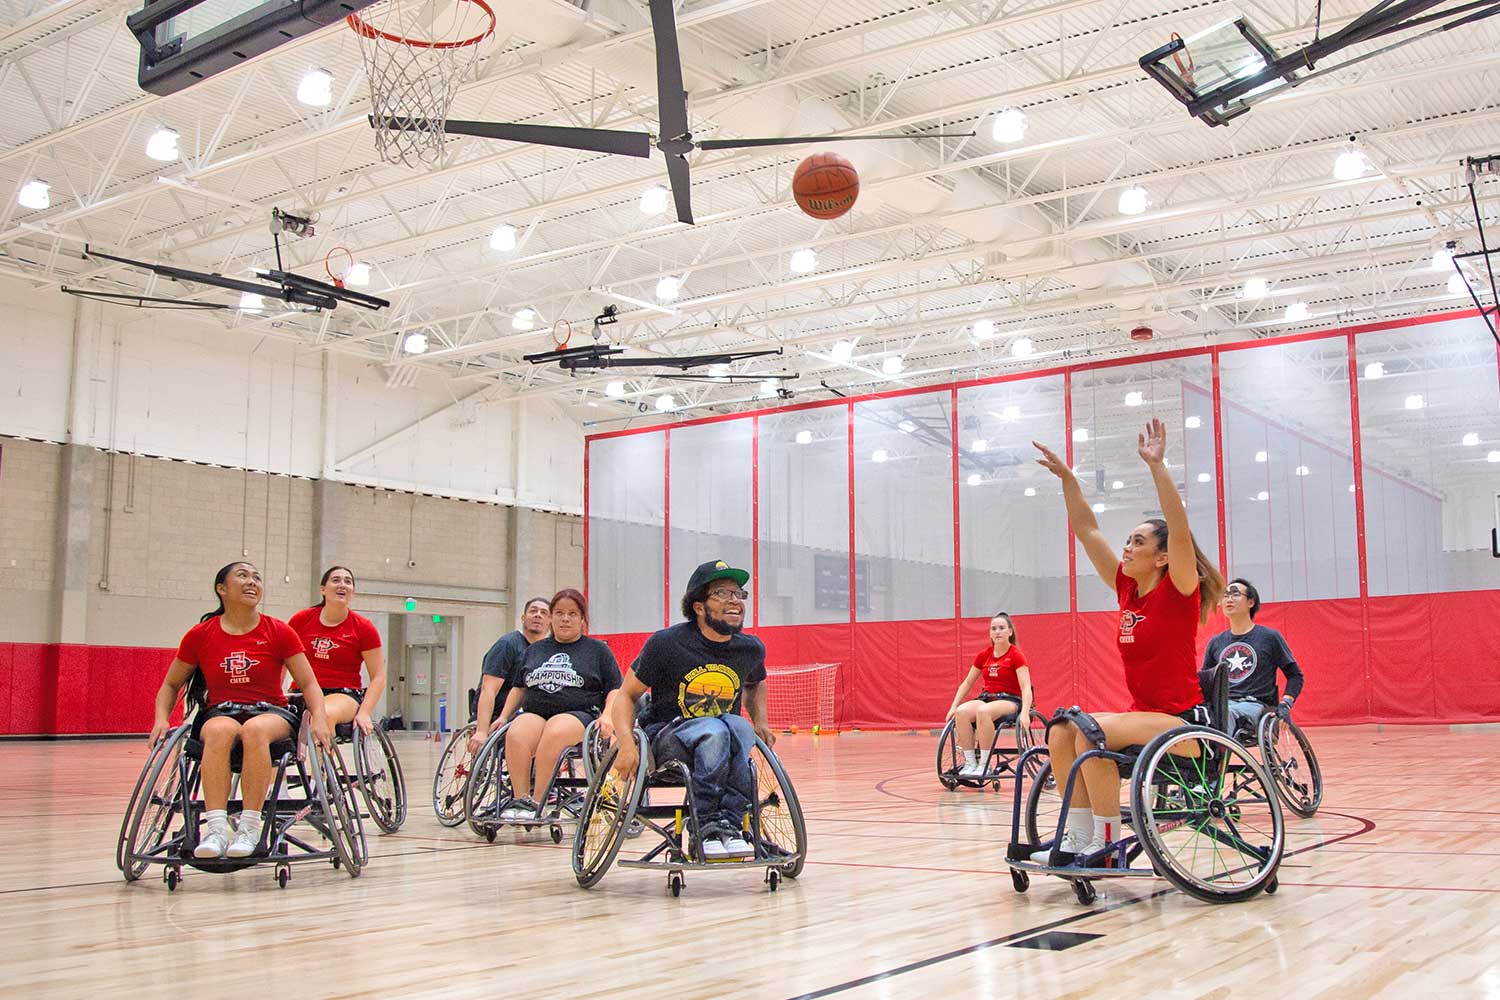 Adapted Athletics Wheelchair basketball game - woman throwing basketball into a hoop